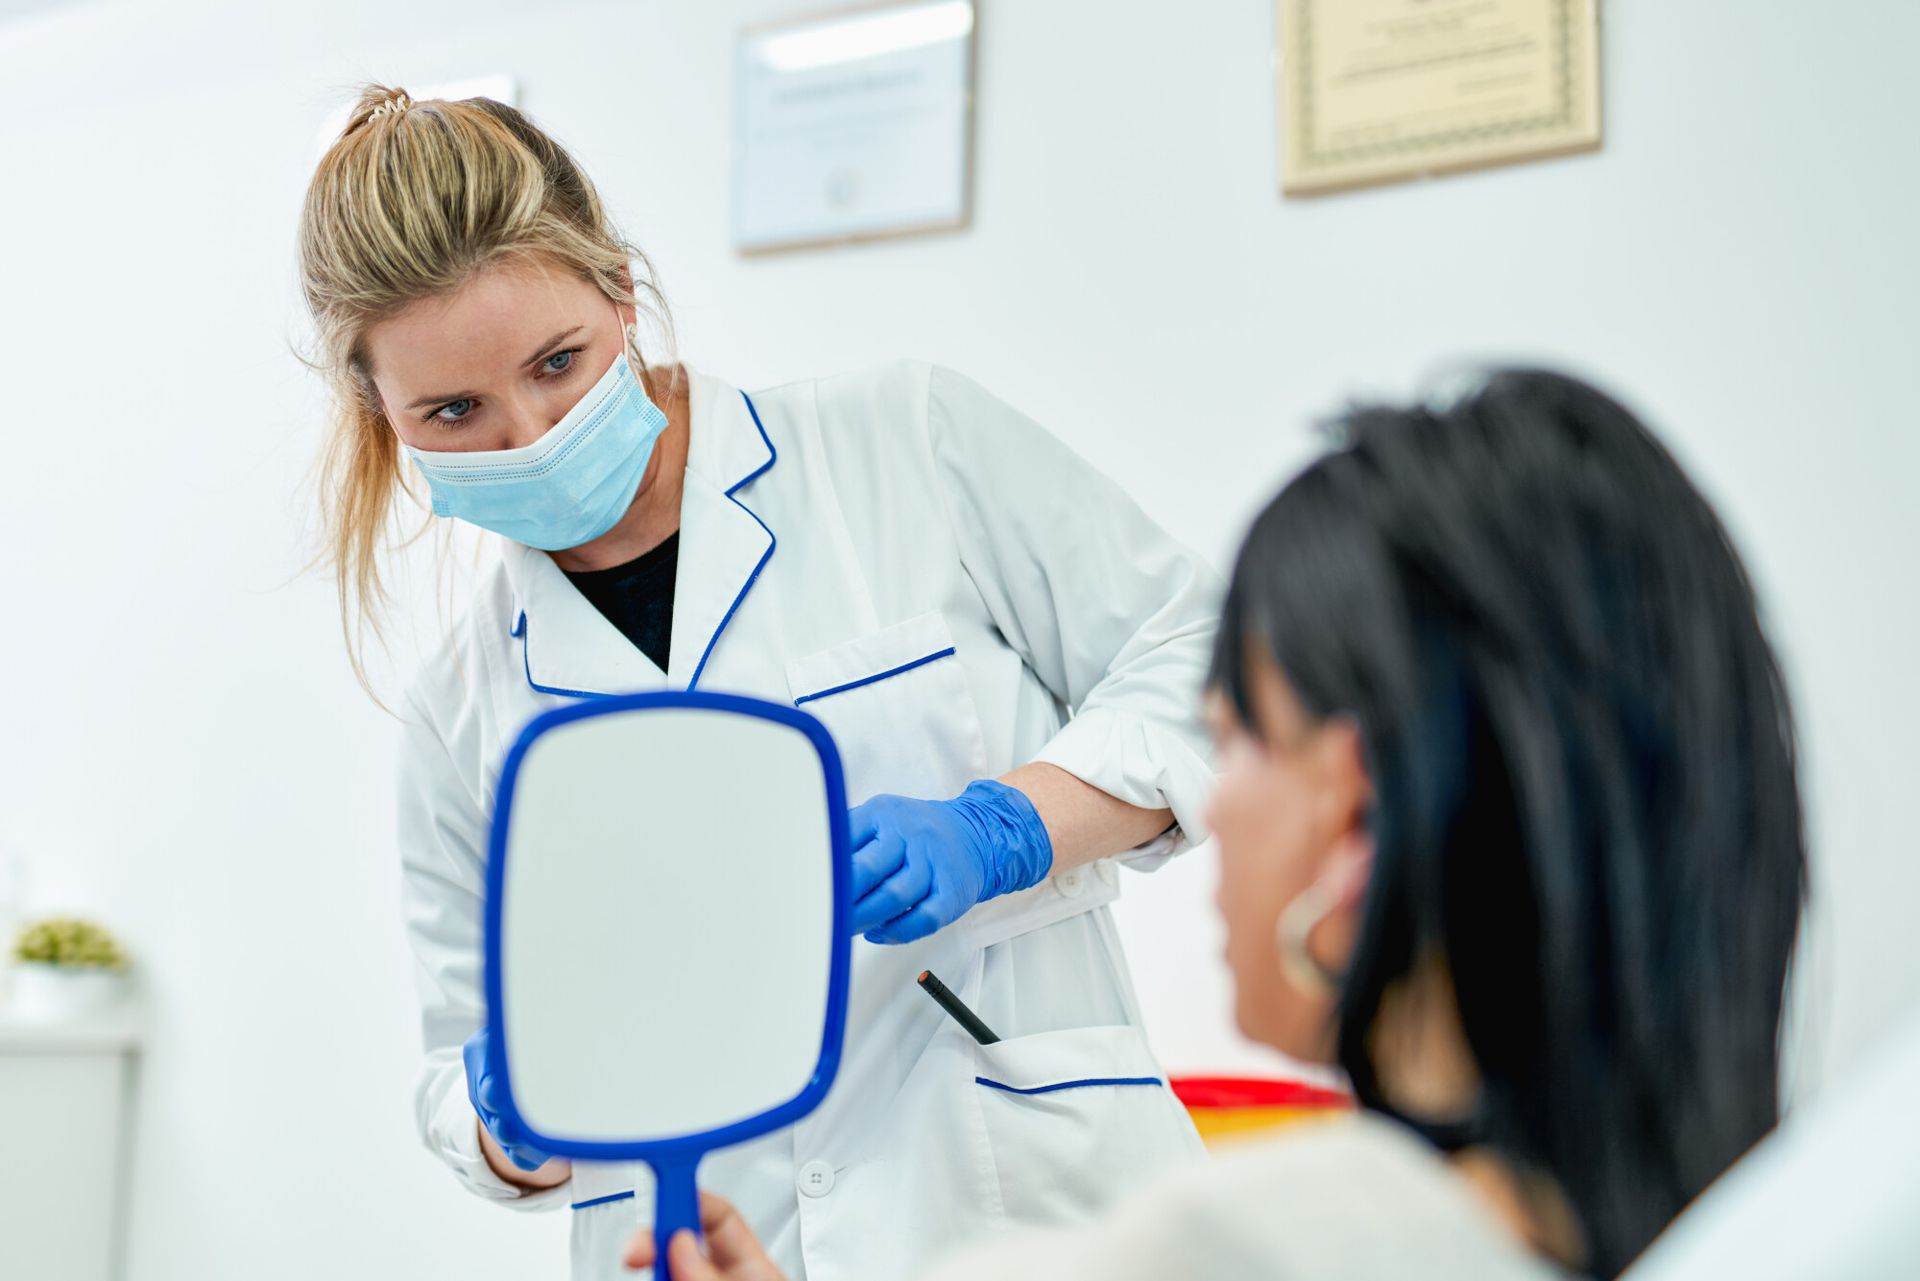 Dentist giving patient a mirror to review smile